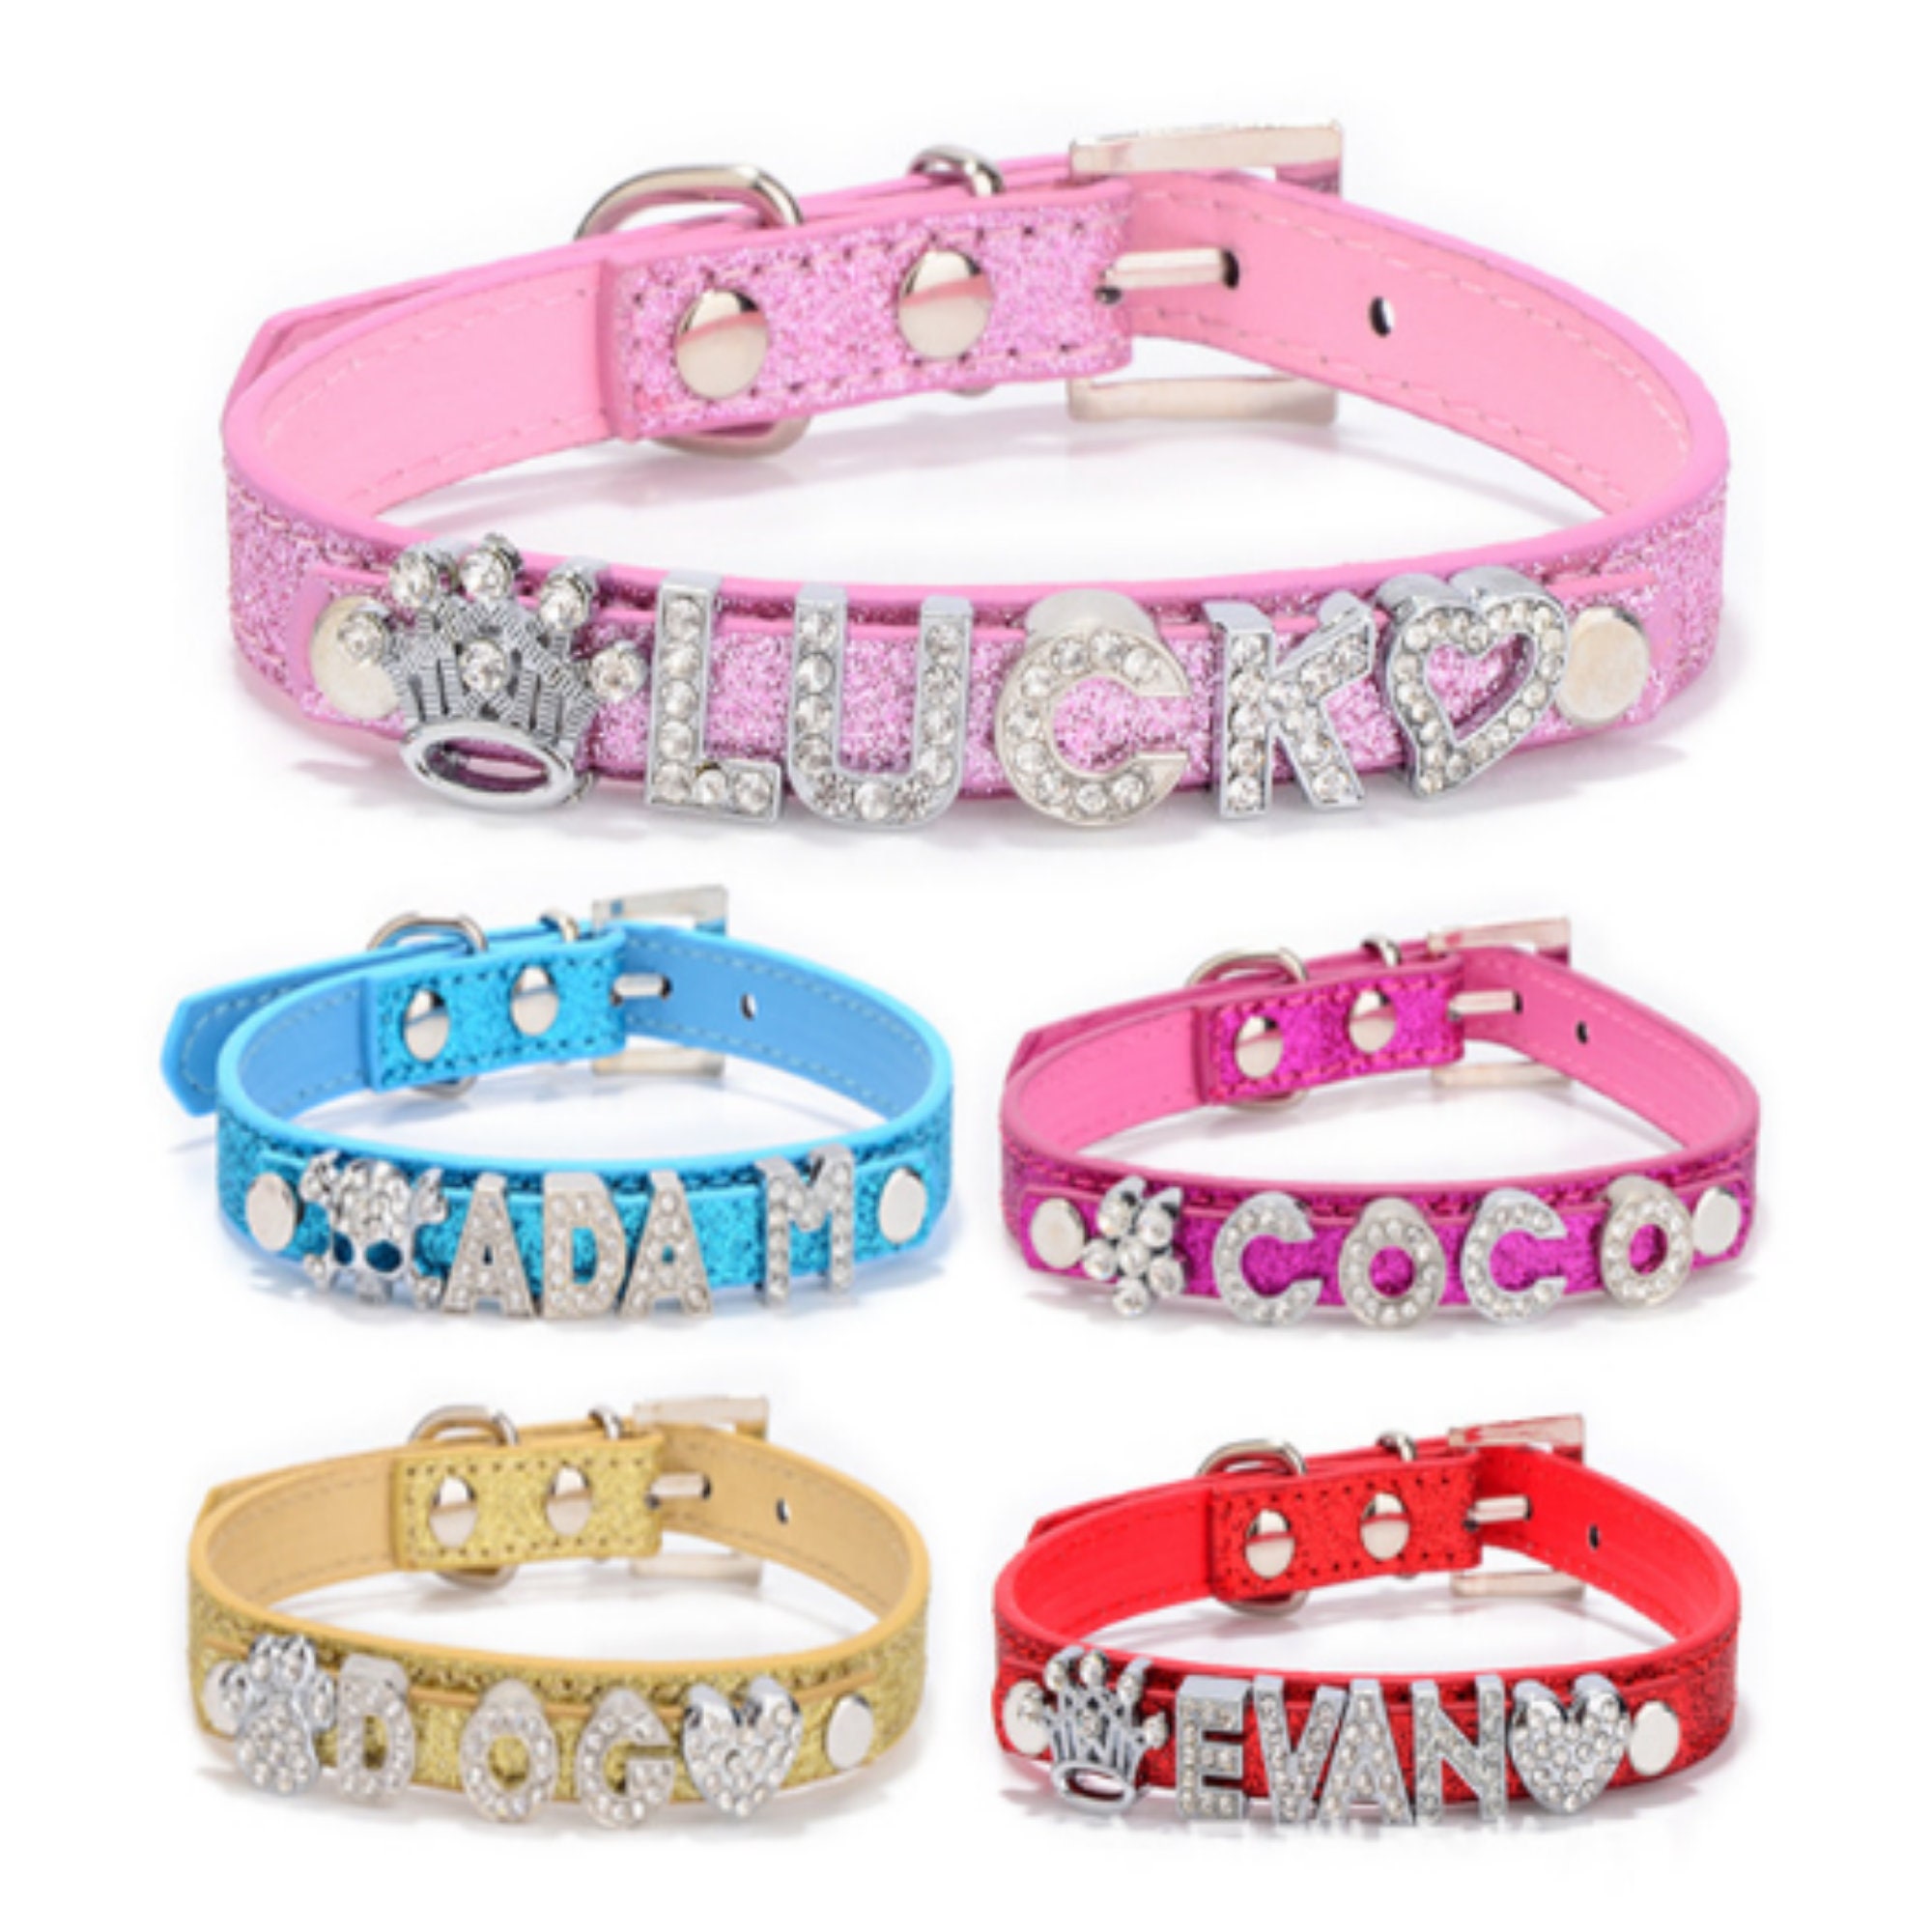 Dogs Kingdom Crystal Rhinestone Necklace Bling Pet Collars for Small Pets Cats Collar 